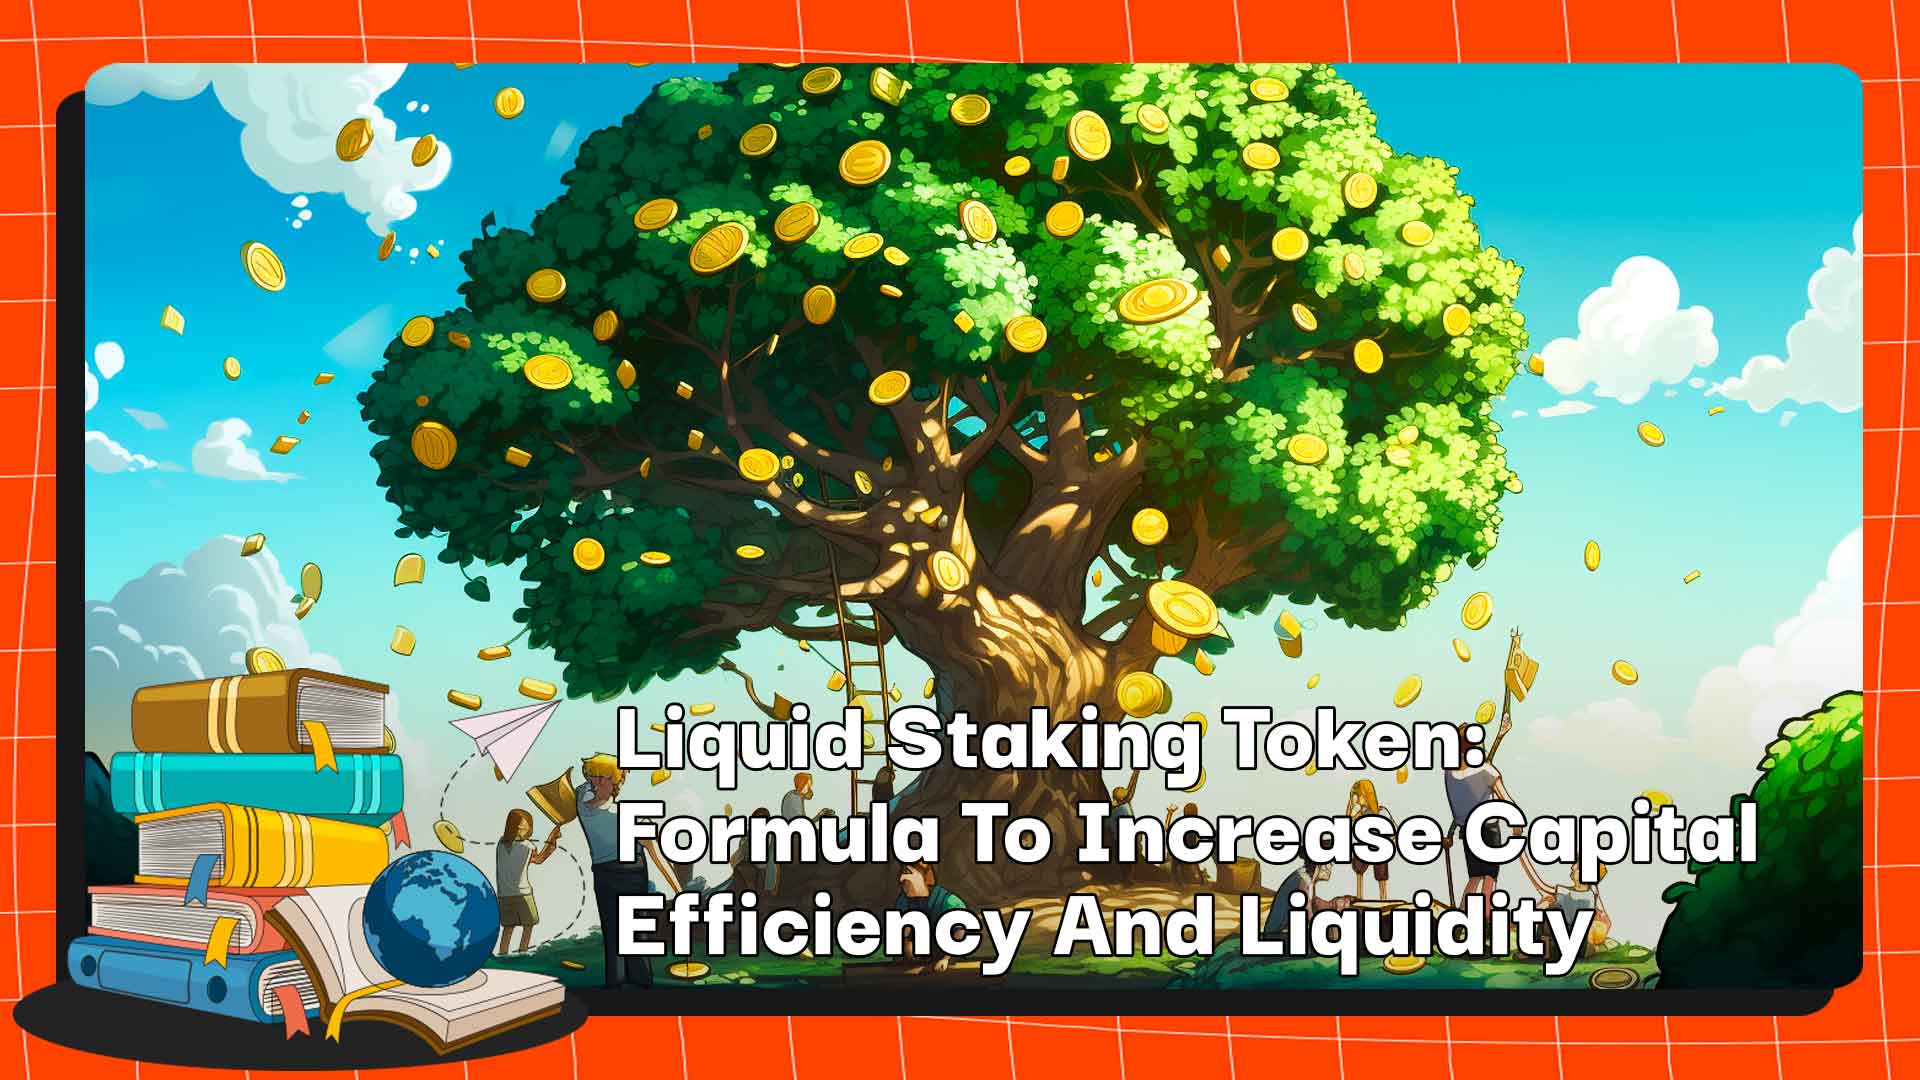 Liquid Staking Token: Formula To Increase Capital Efficiency And Liquidity